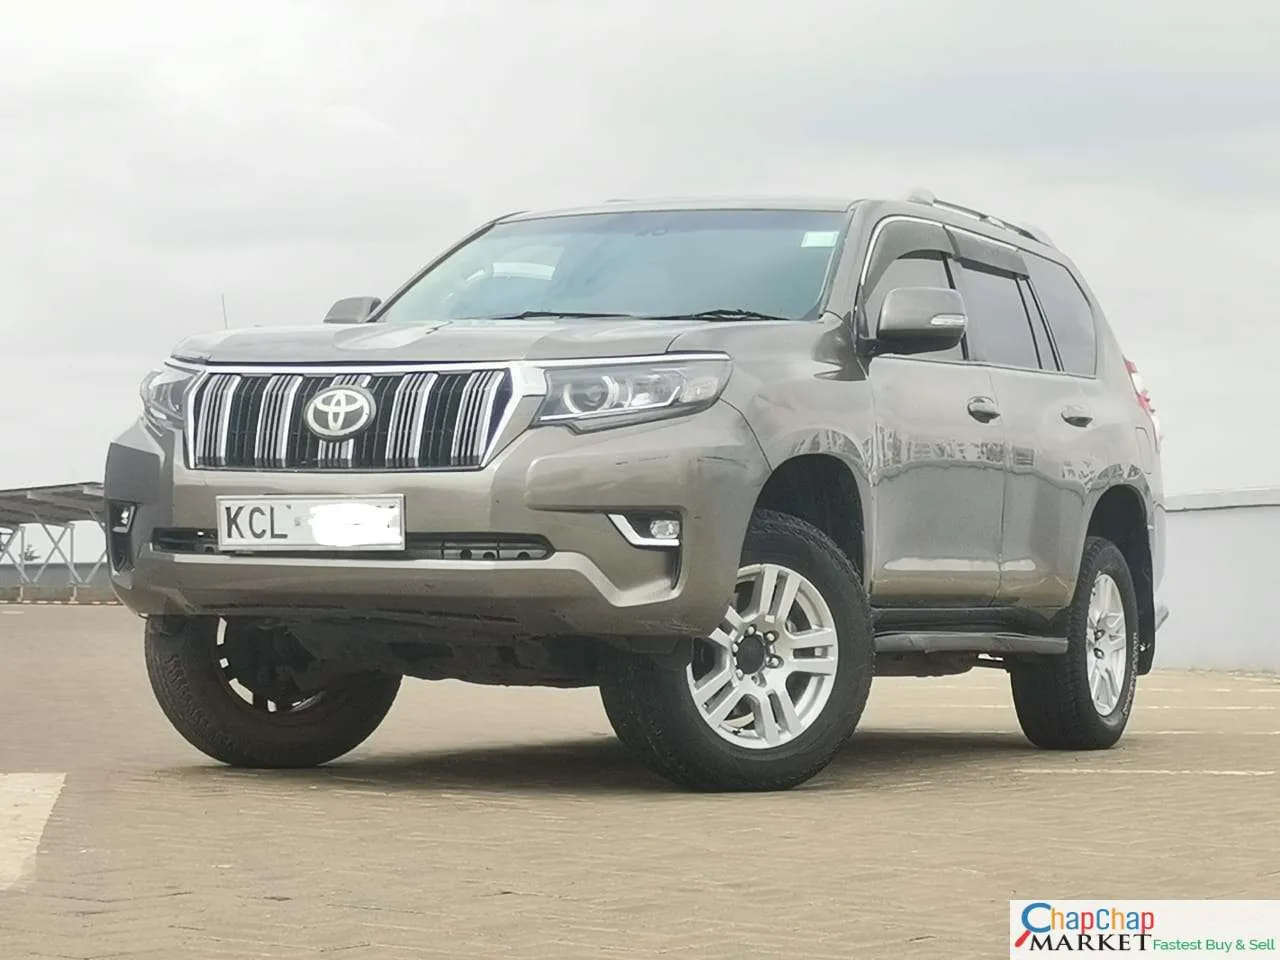 Toyota Prado j150 for sale in Kenya with SUNROOF leather 🔥 🔥 You Pay 30% Deposit Trade in OK